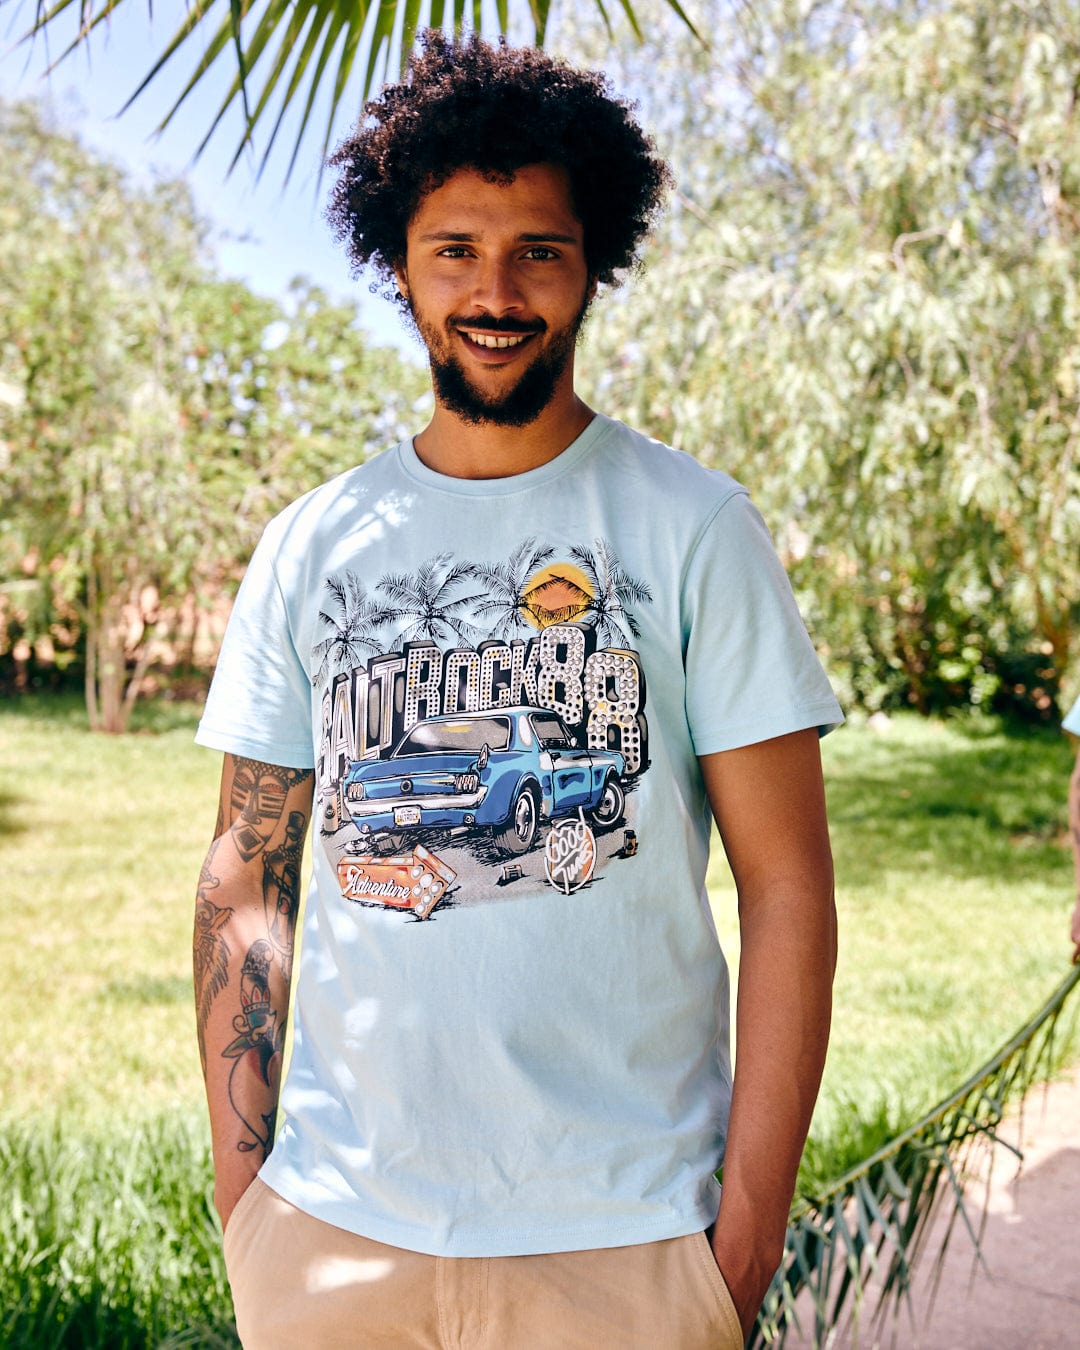 A man with curly hair, wearing a Saltrock Neon Boneyard t-shirt and khaki shorts, smiles while standing outdoors in a sunny, garden-like setting.